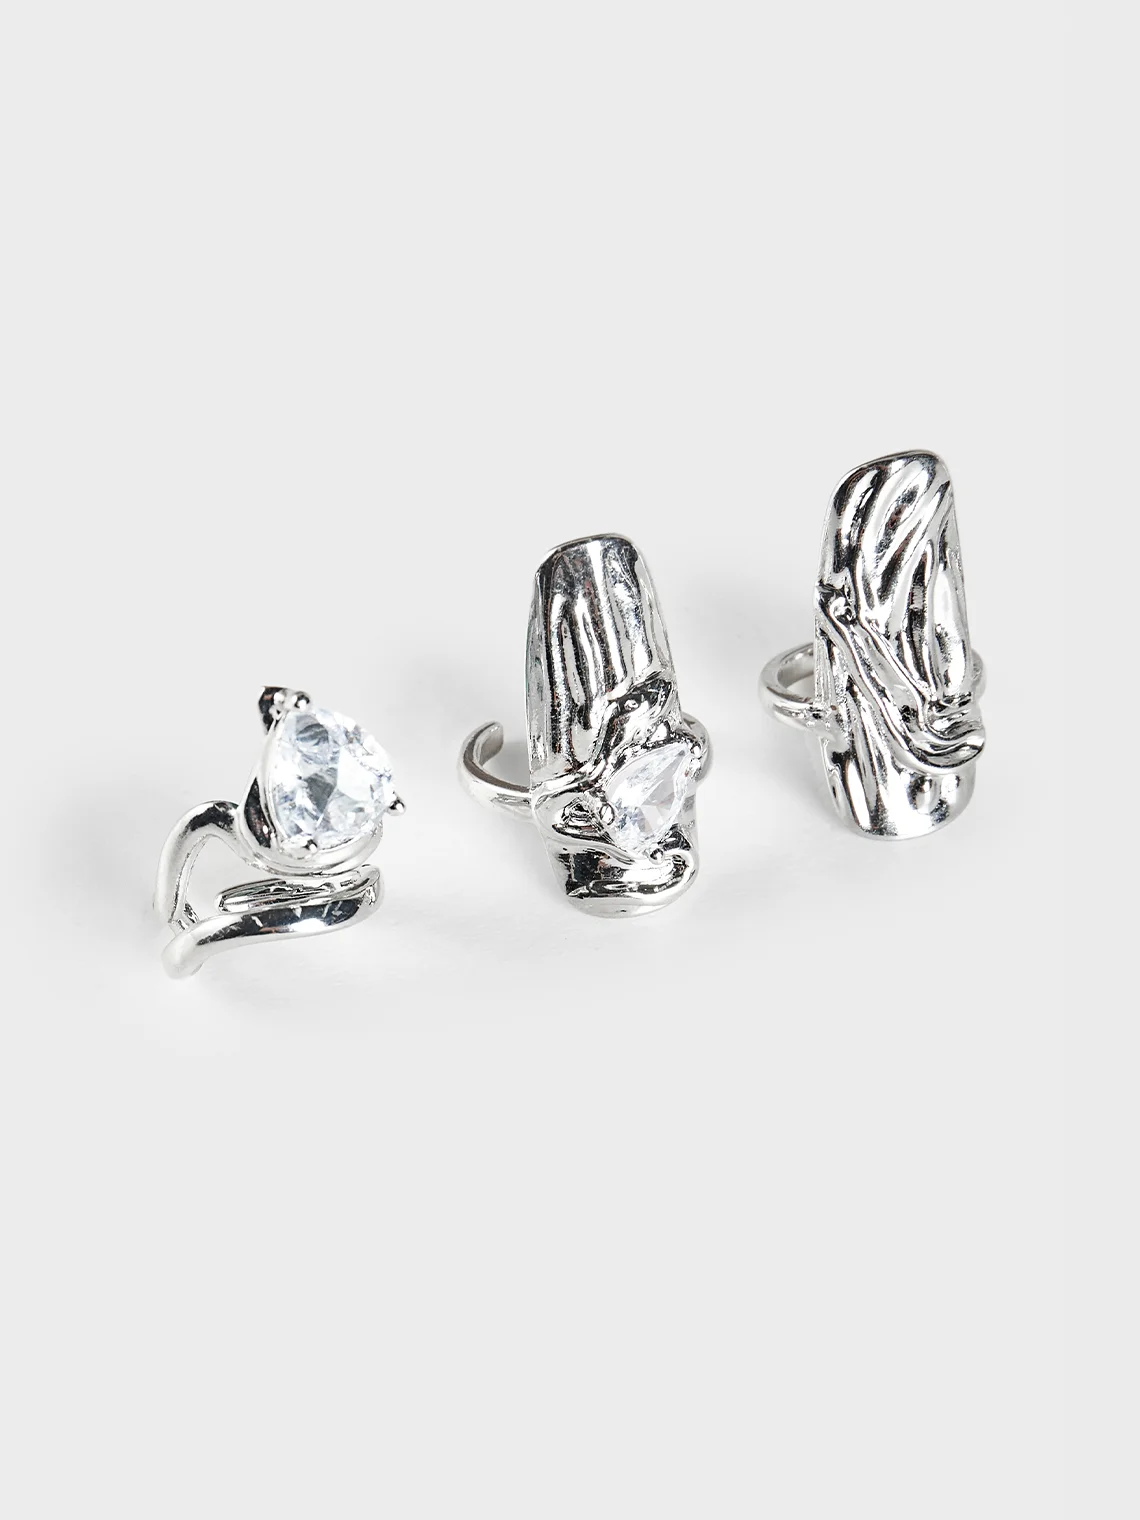 Edgy Silver Accessory Rings